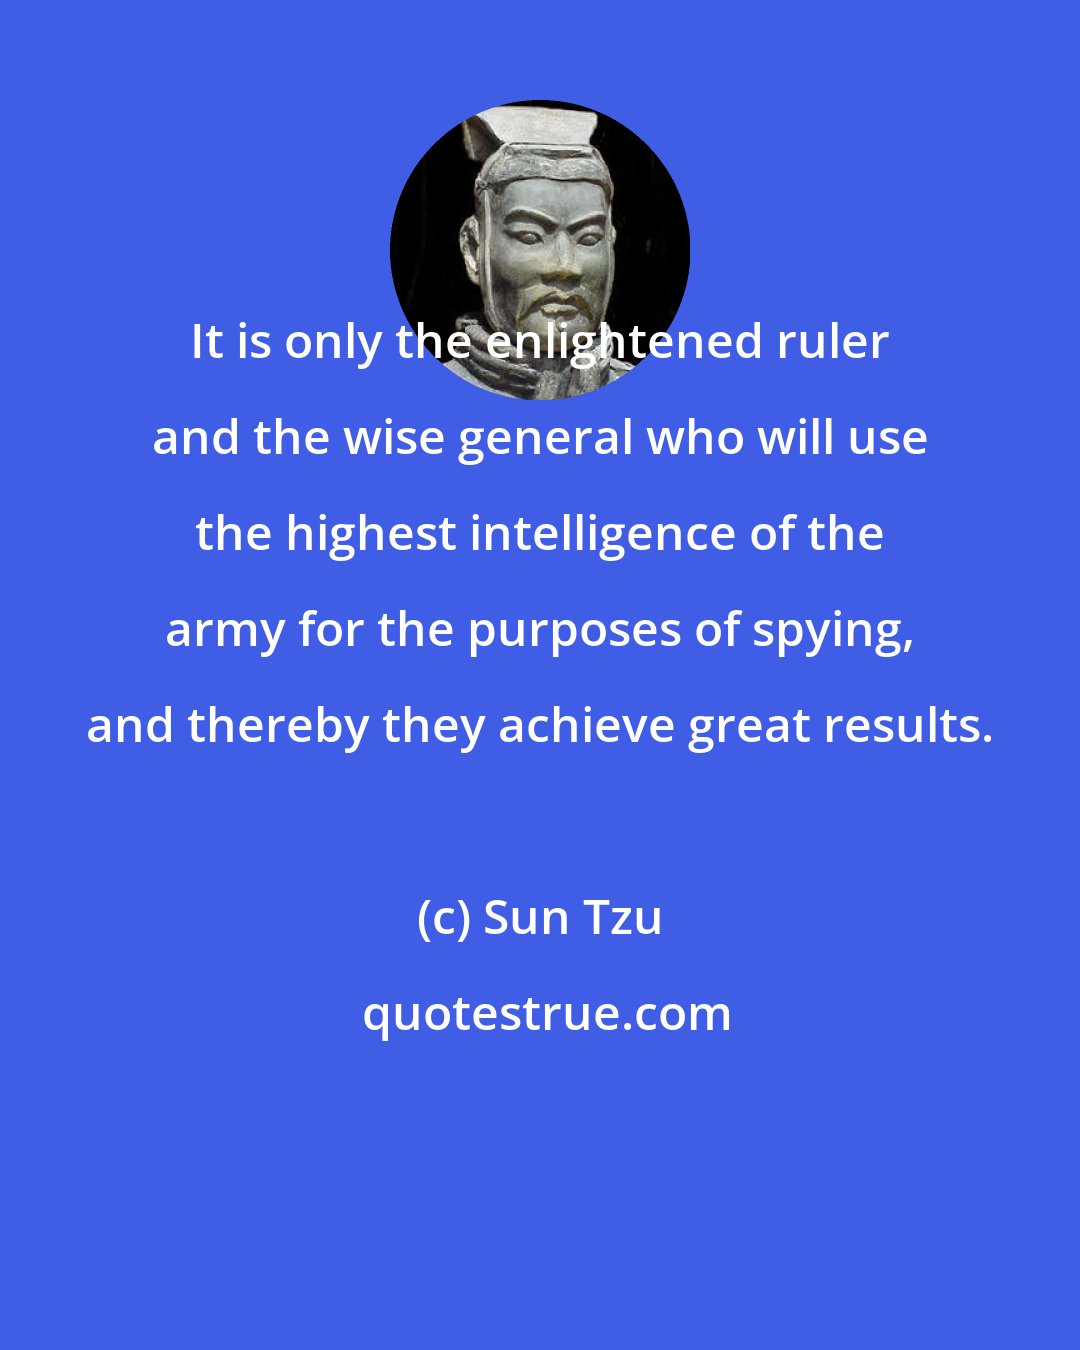 Sun Tzu: It is only the enlightened ruler and the wise general who will use the highest intelligence of the army for the purposes of spying, and thereby they achieve great results.